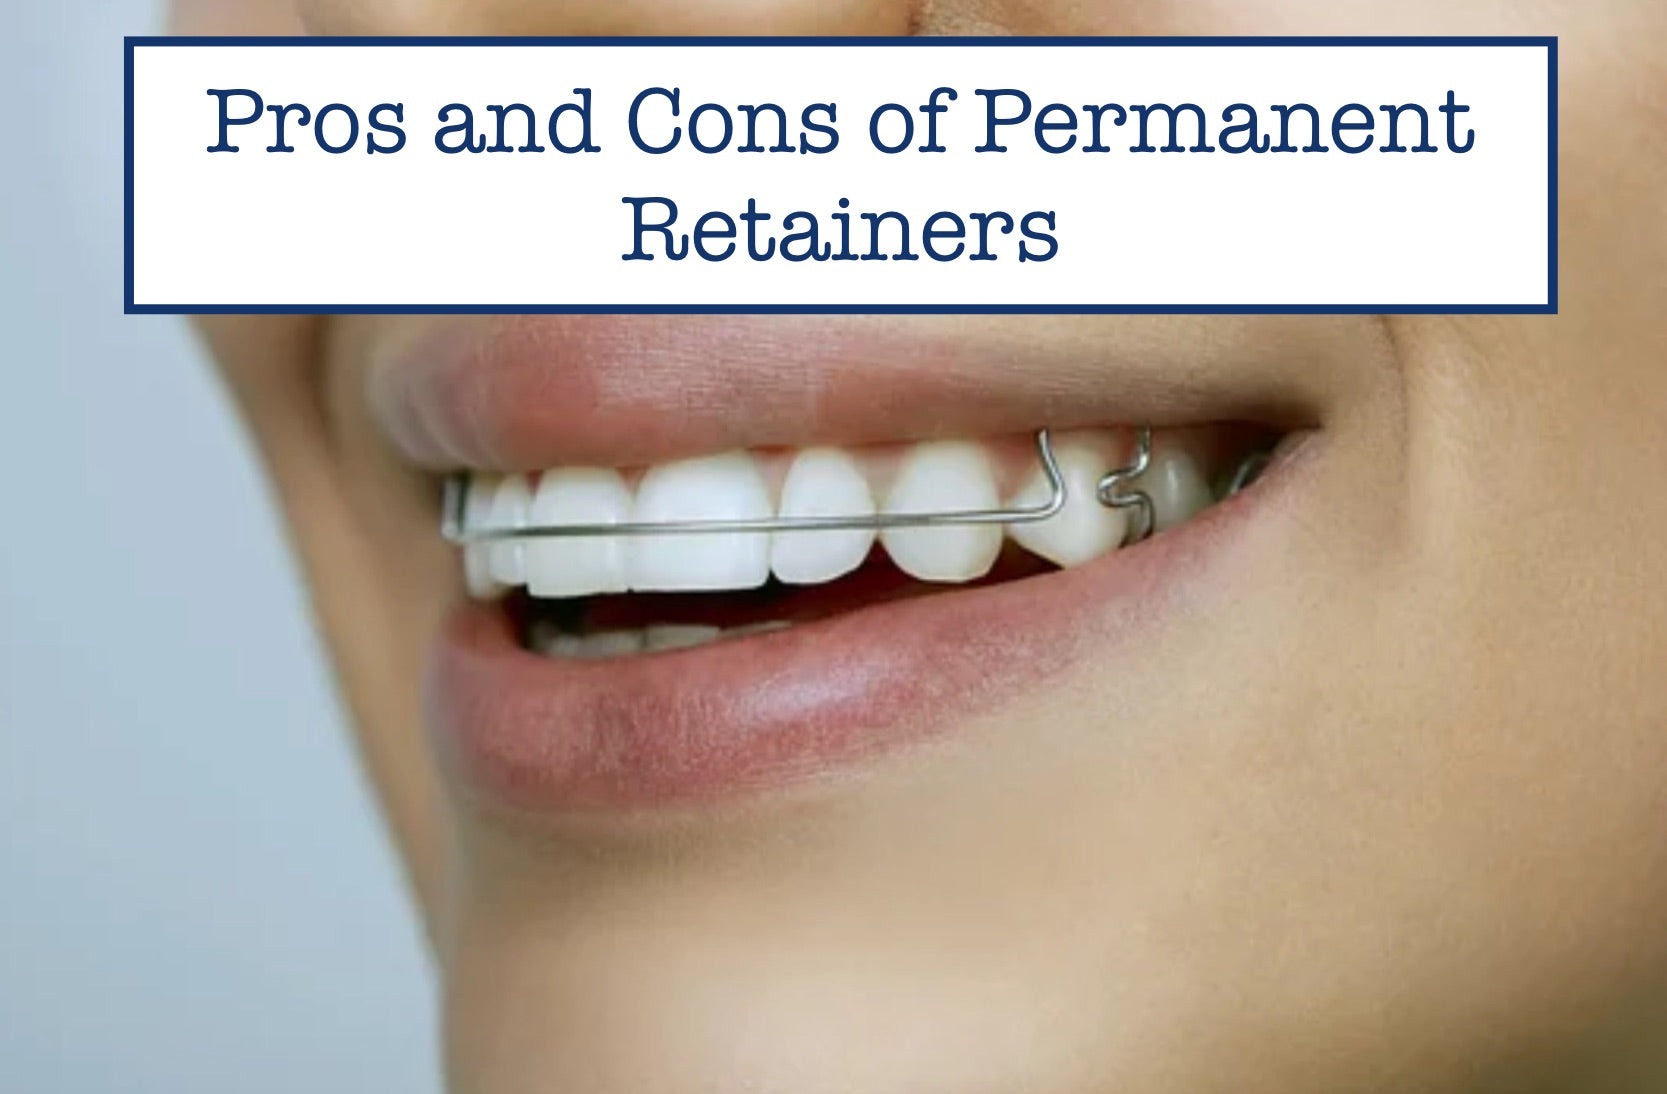 Pros and Cons of Permanent Retainers